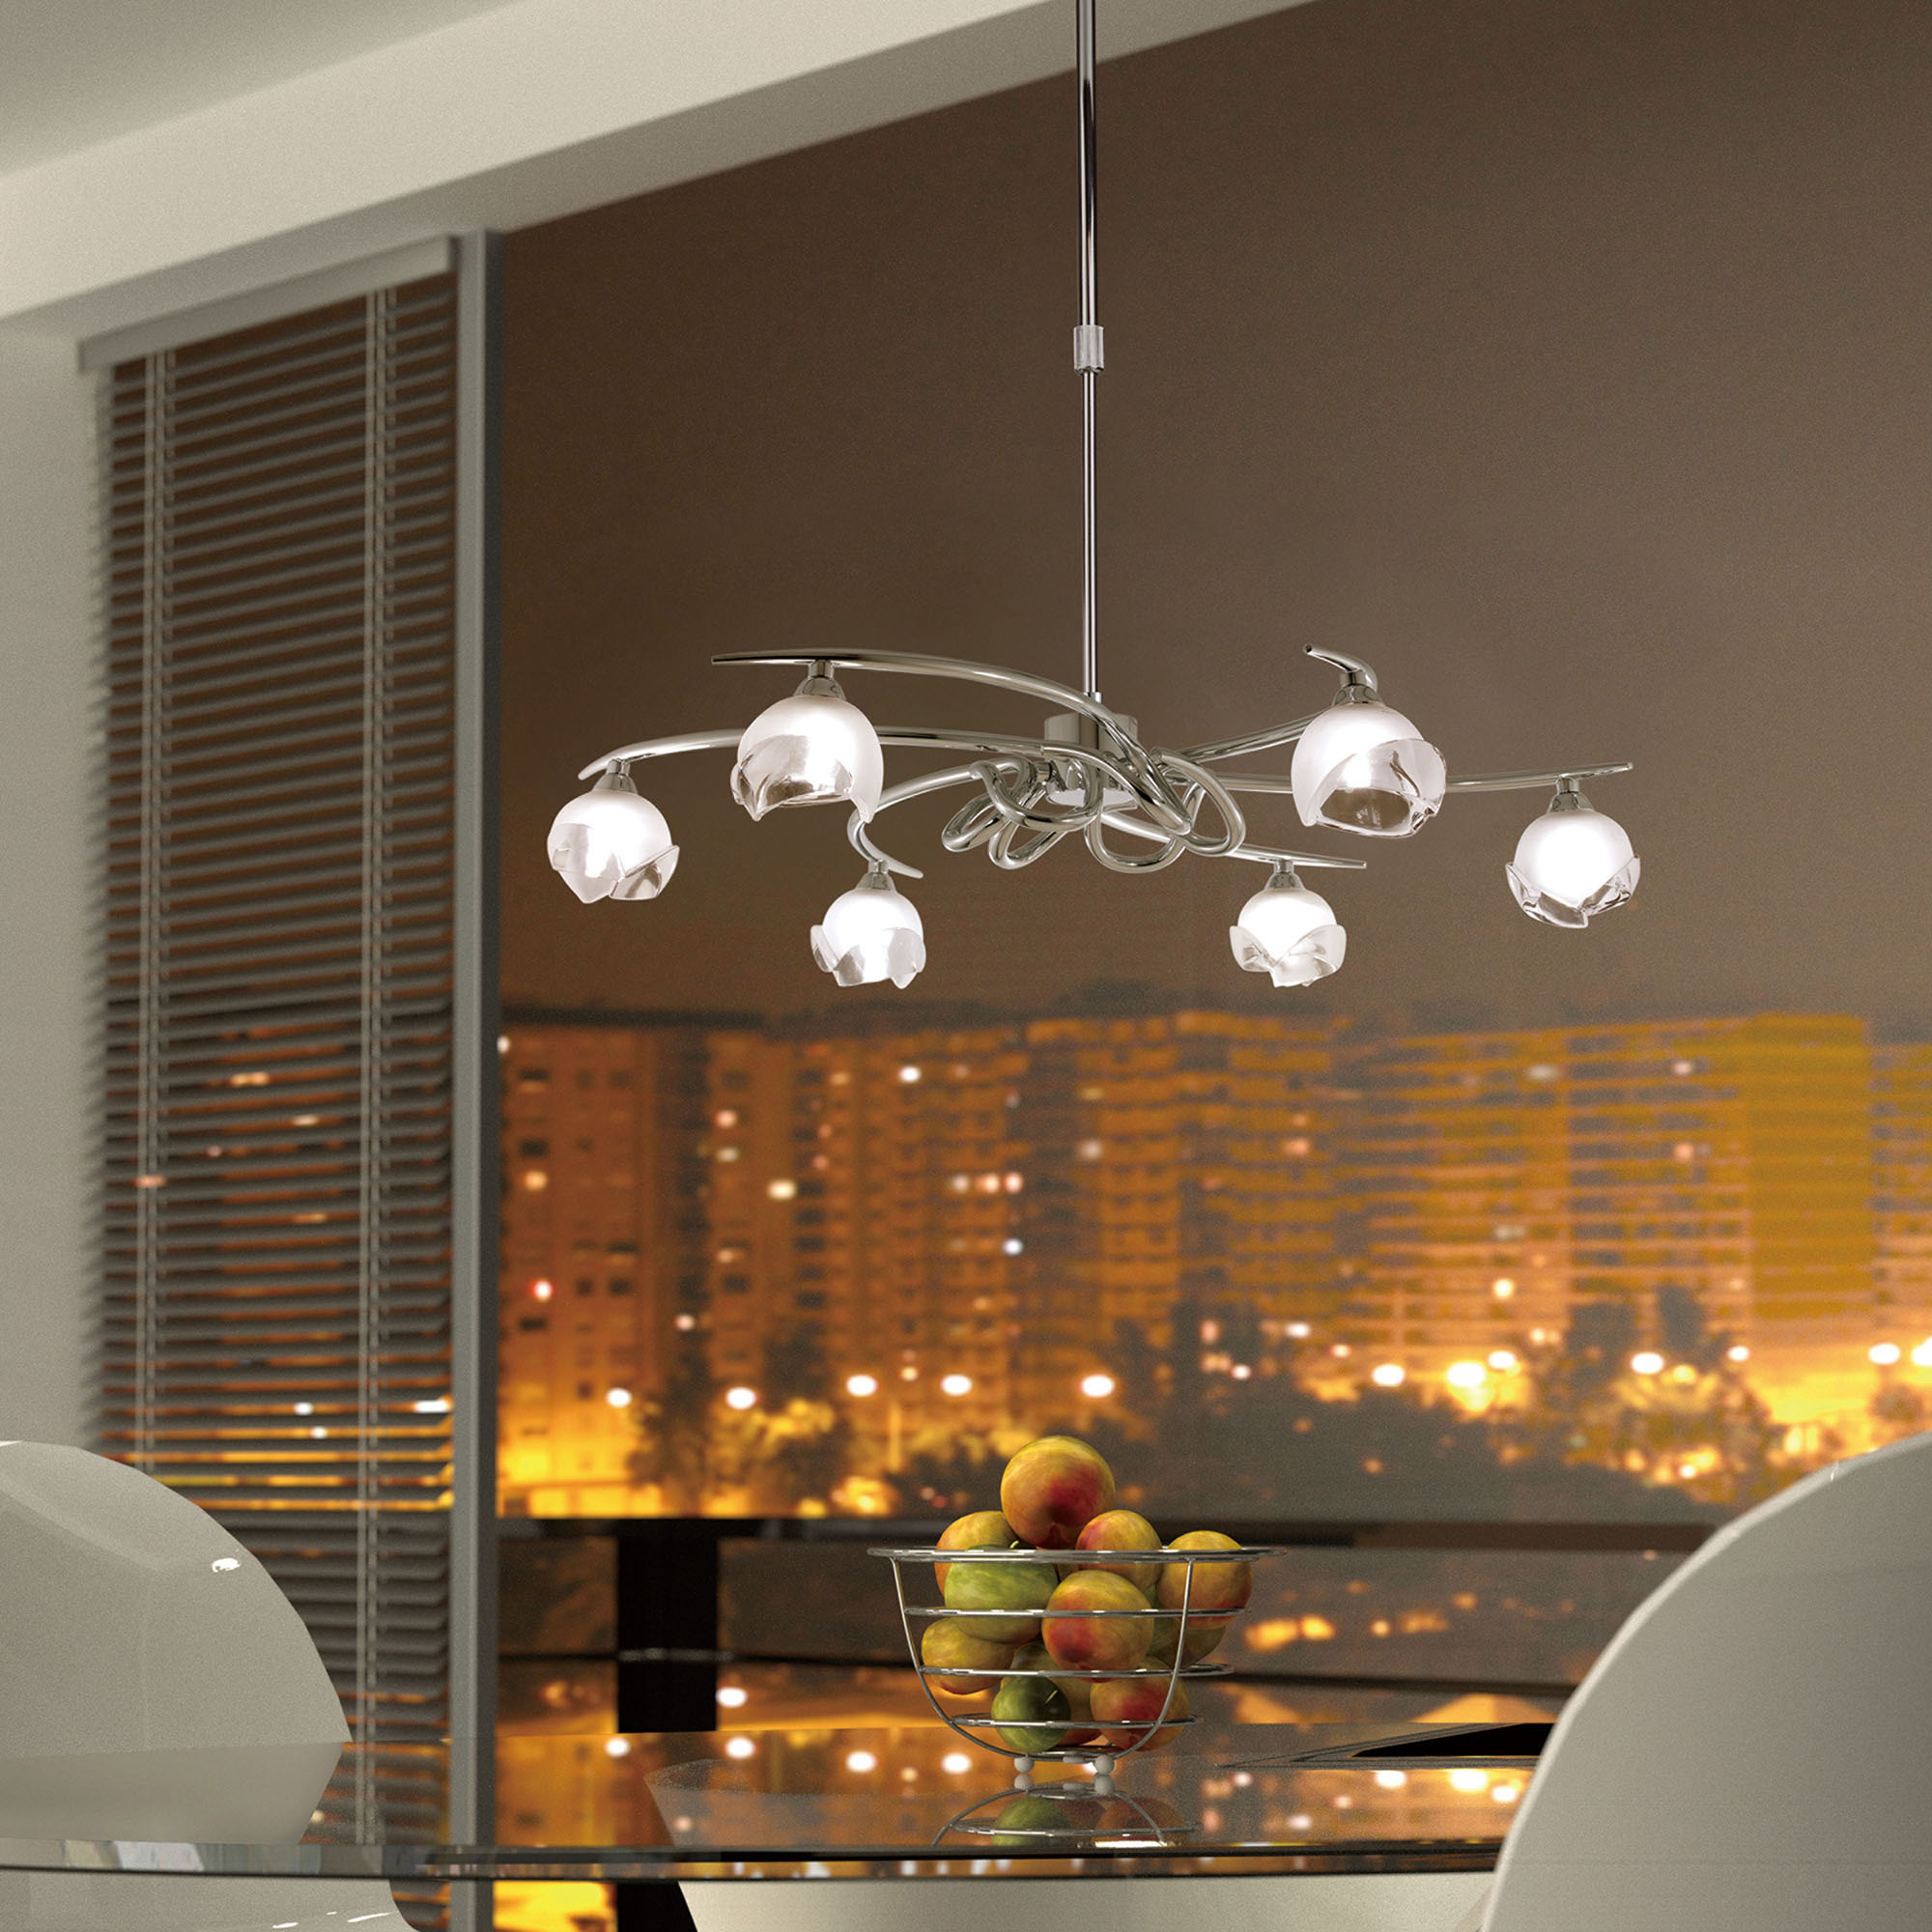 Fragma Ceiling Lights Mantra Multi Arm Fittings